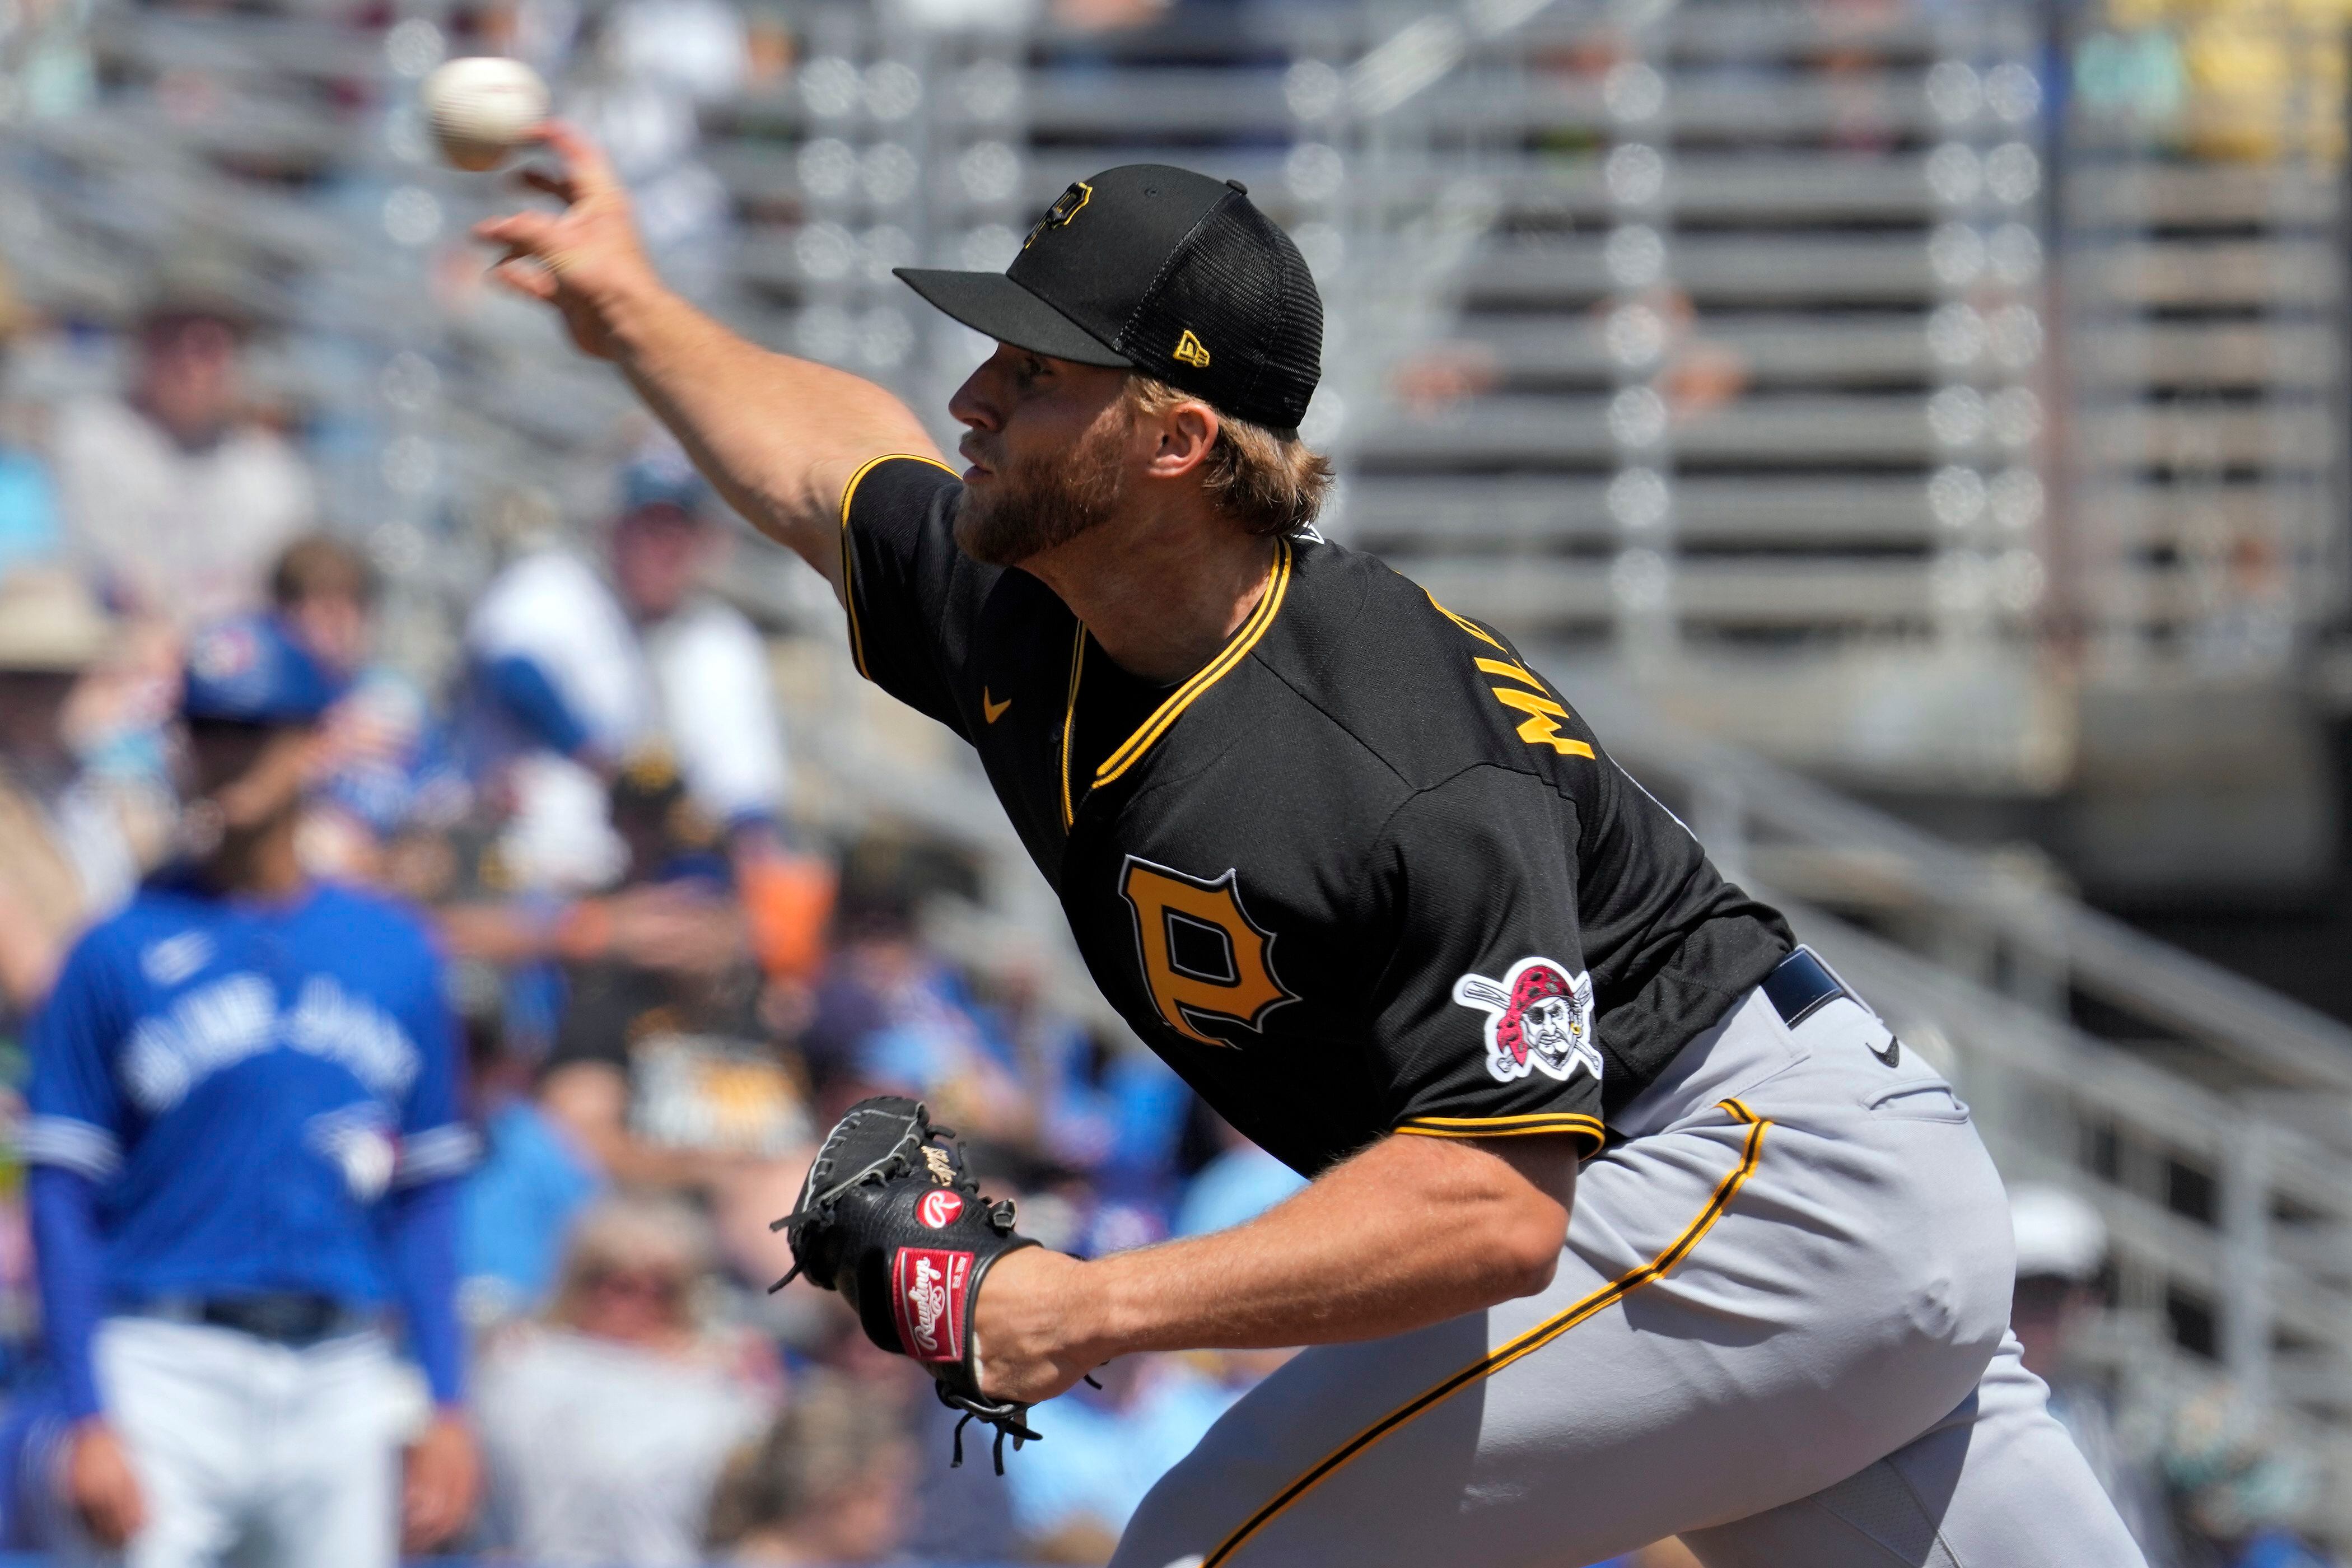 Bucs' Keller gets opening day nod and a bottle of bubbly